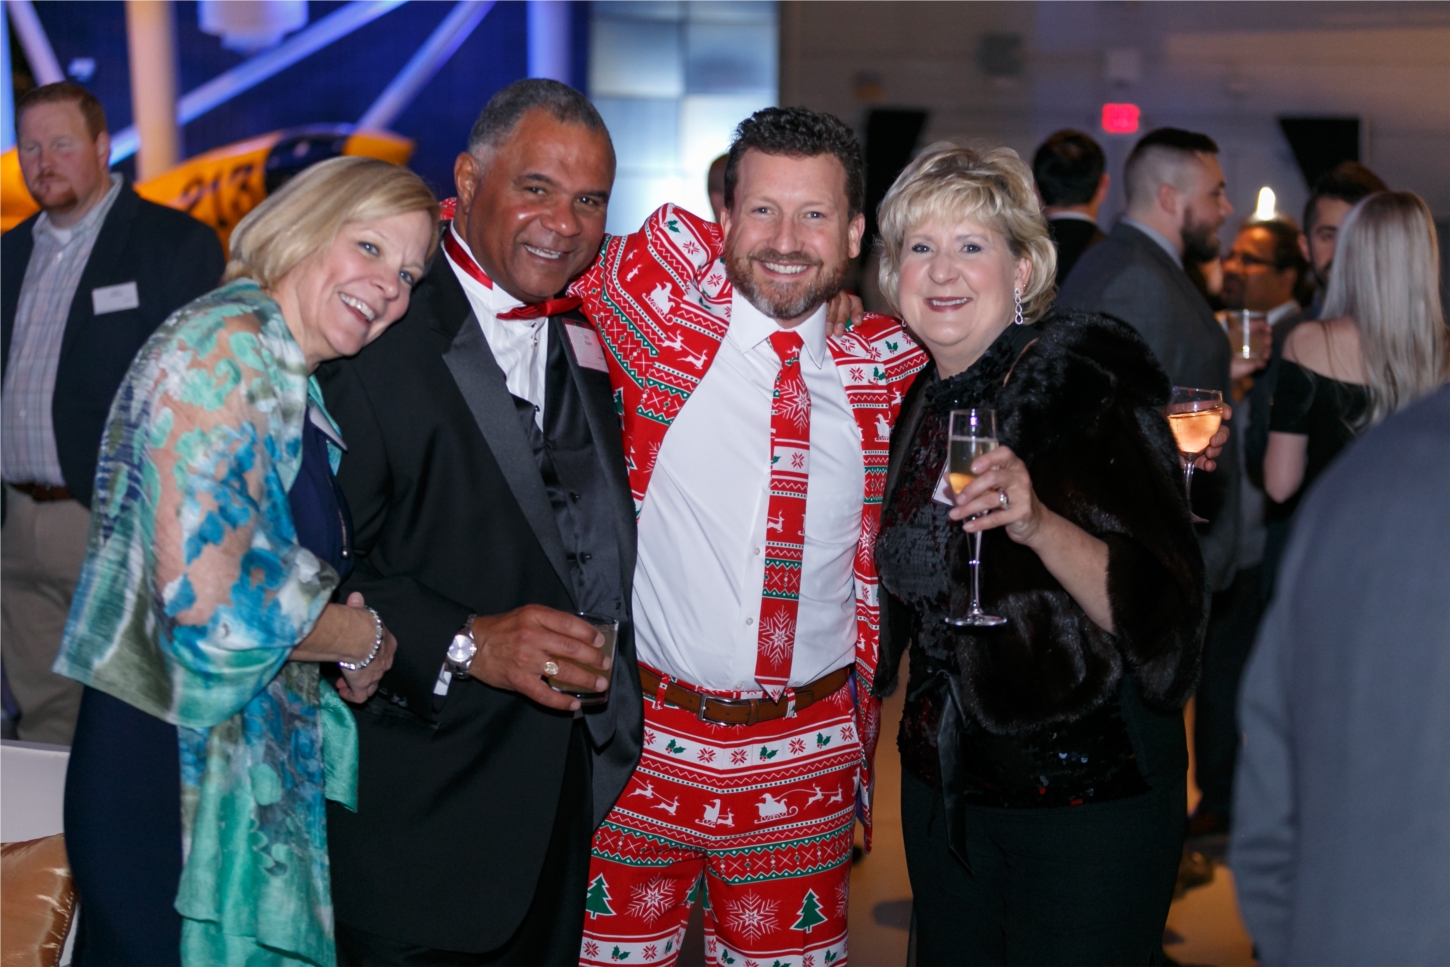 Our Holiday party at the Steven F. Udvar-Hazy Center, National Air and Space Museum